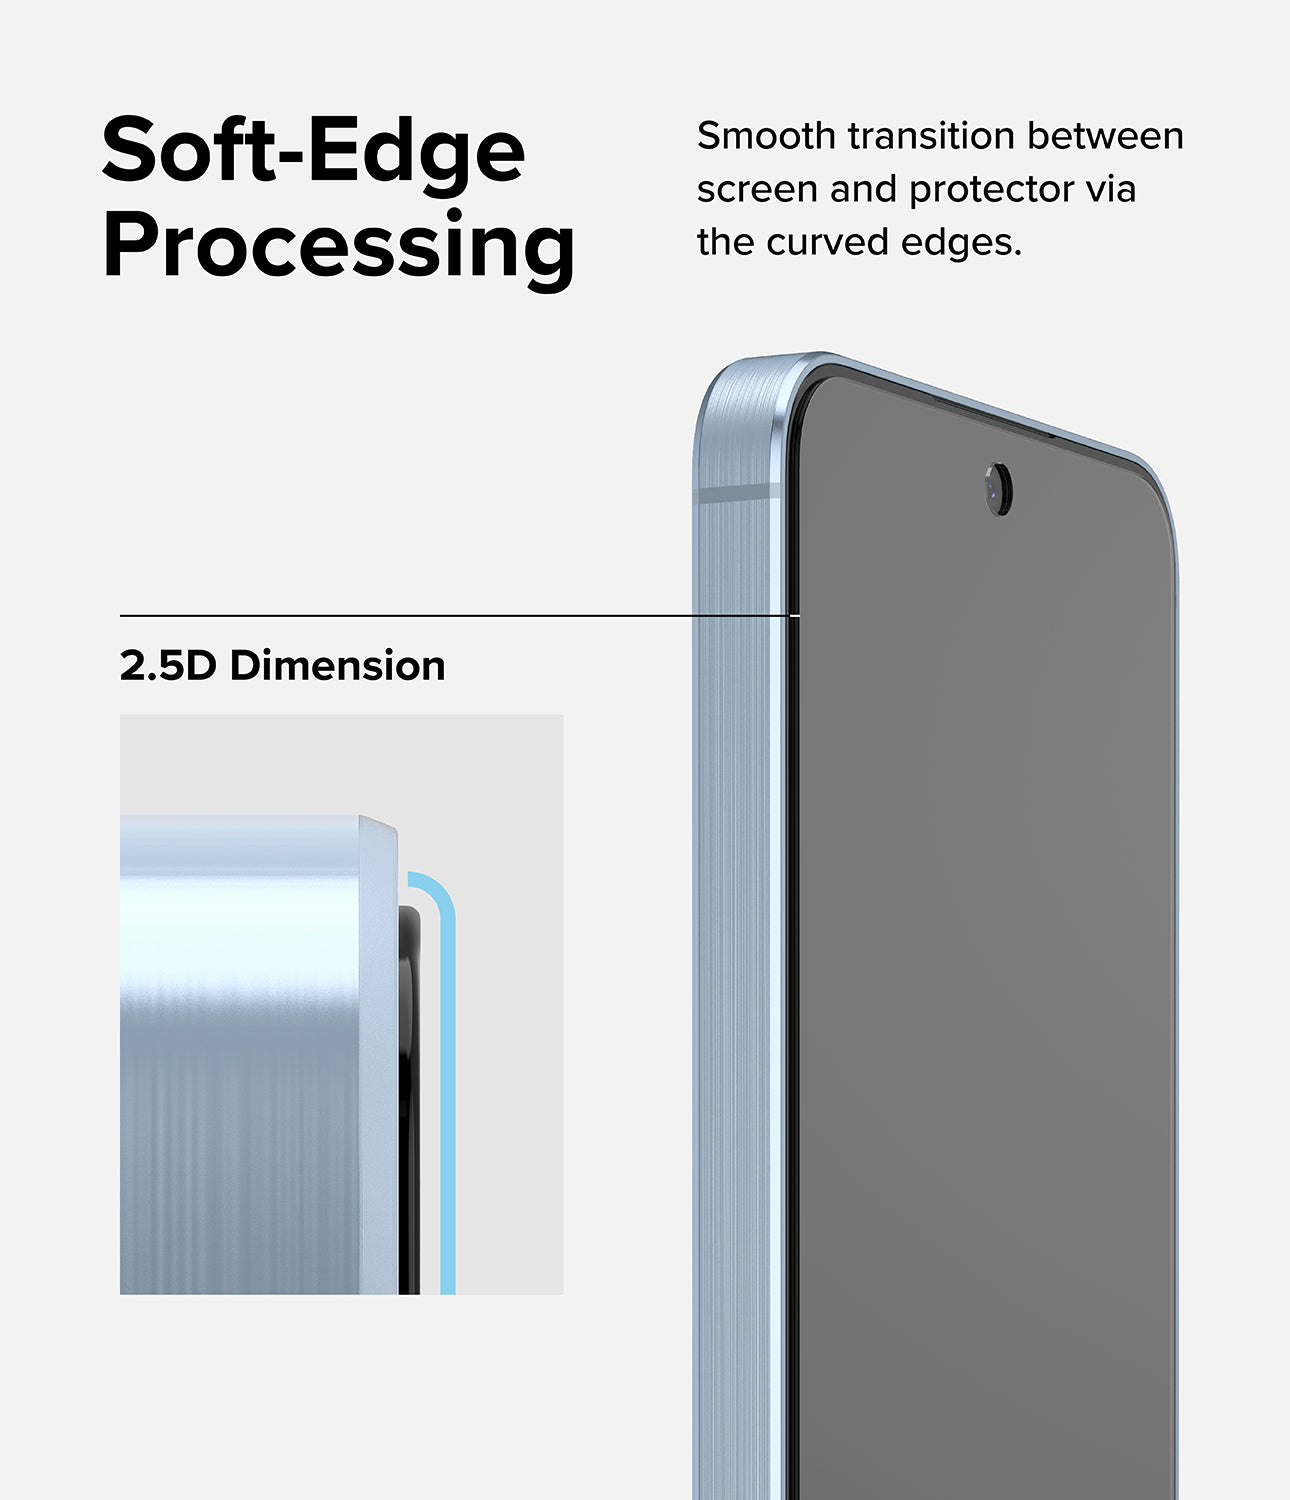 Galaxy A55 Screen Protector | Easy Slide Tempered Glass - Soft-Edge Processing. Smooth transition between screen and protector via the curved edges.